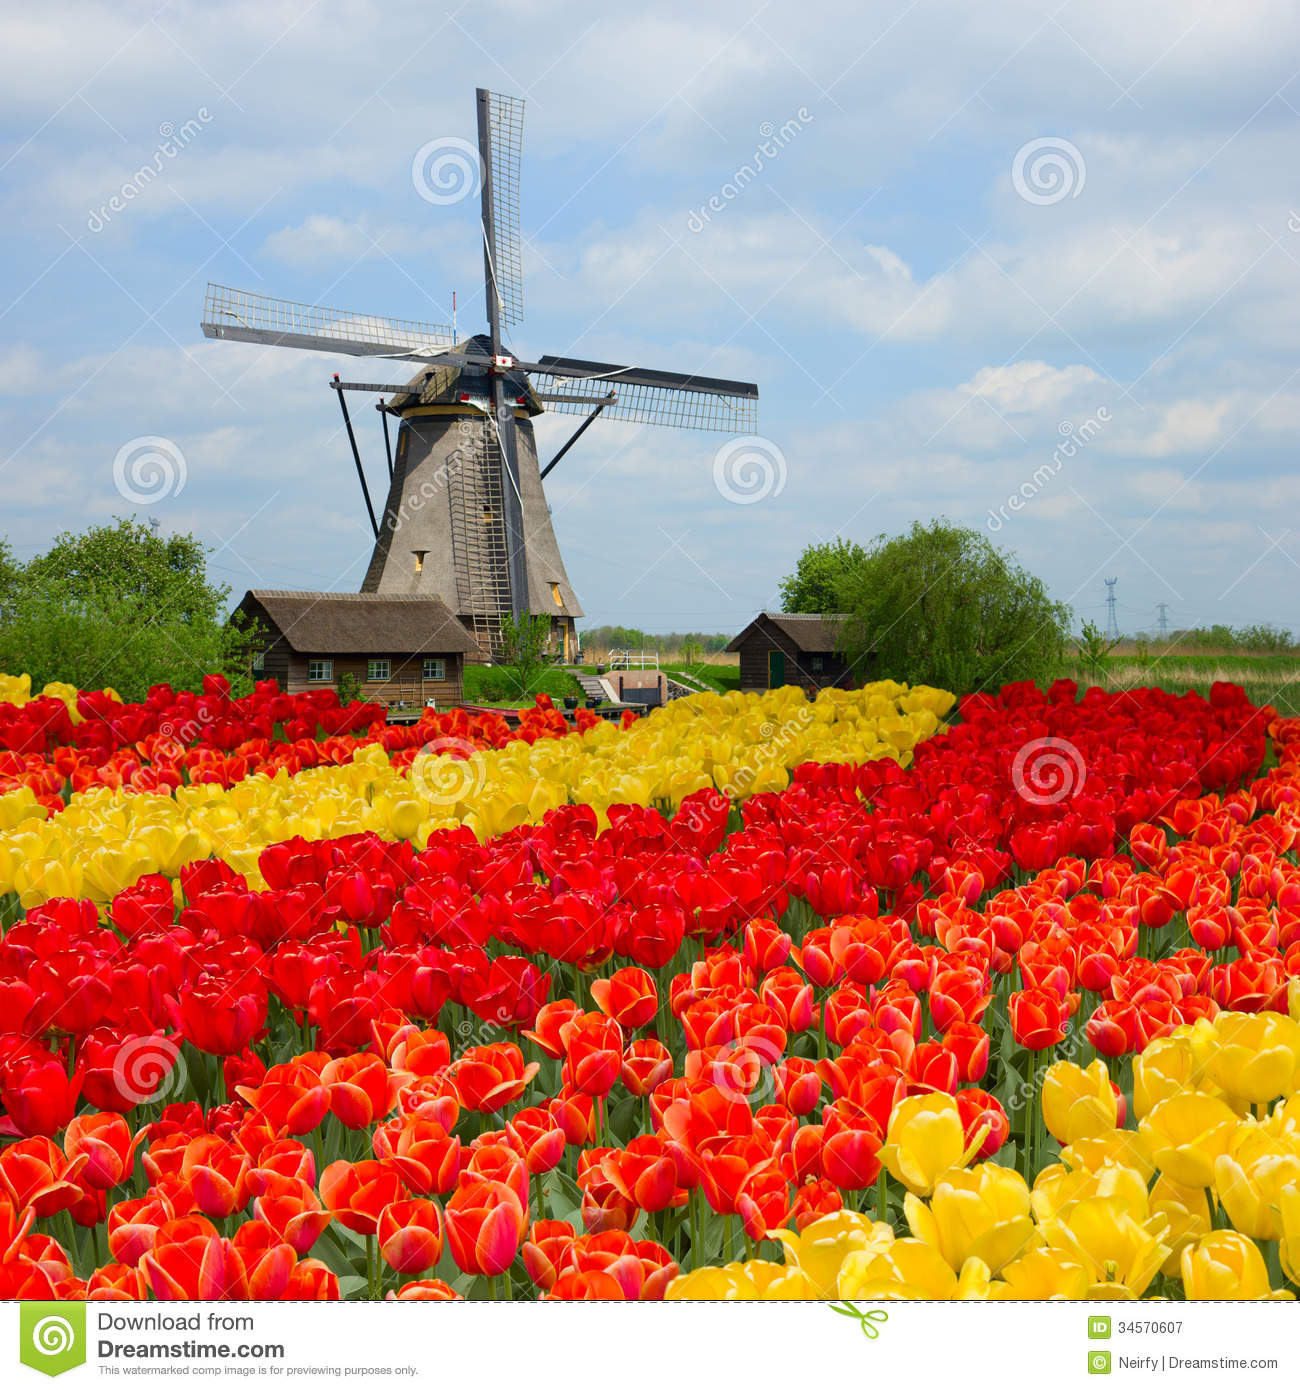 Netherlands Tulips Stock Photos, Images, & Pictures.